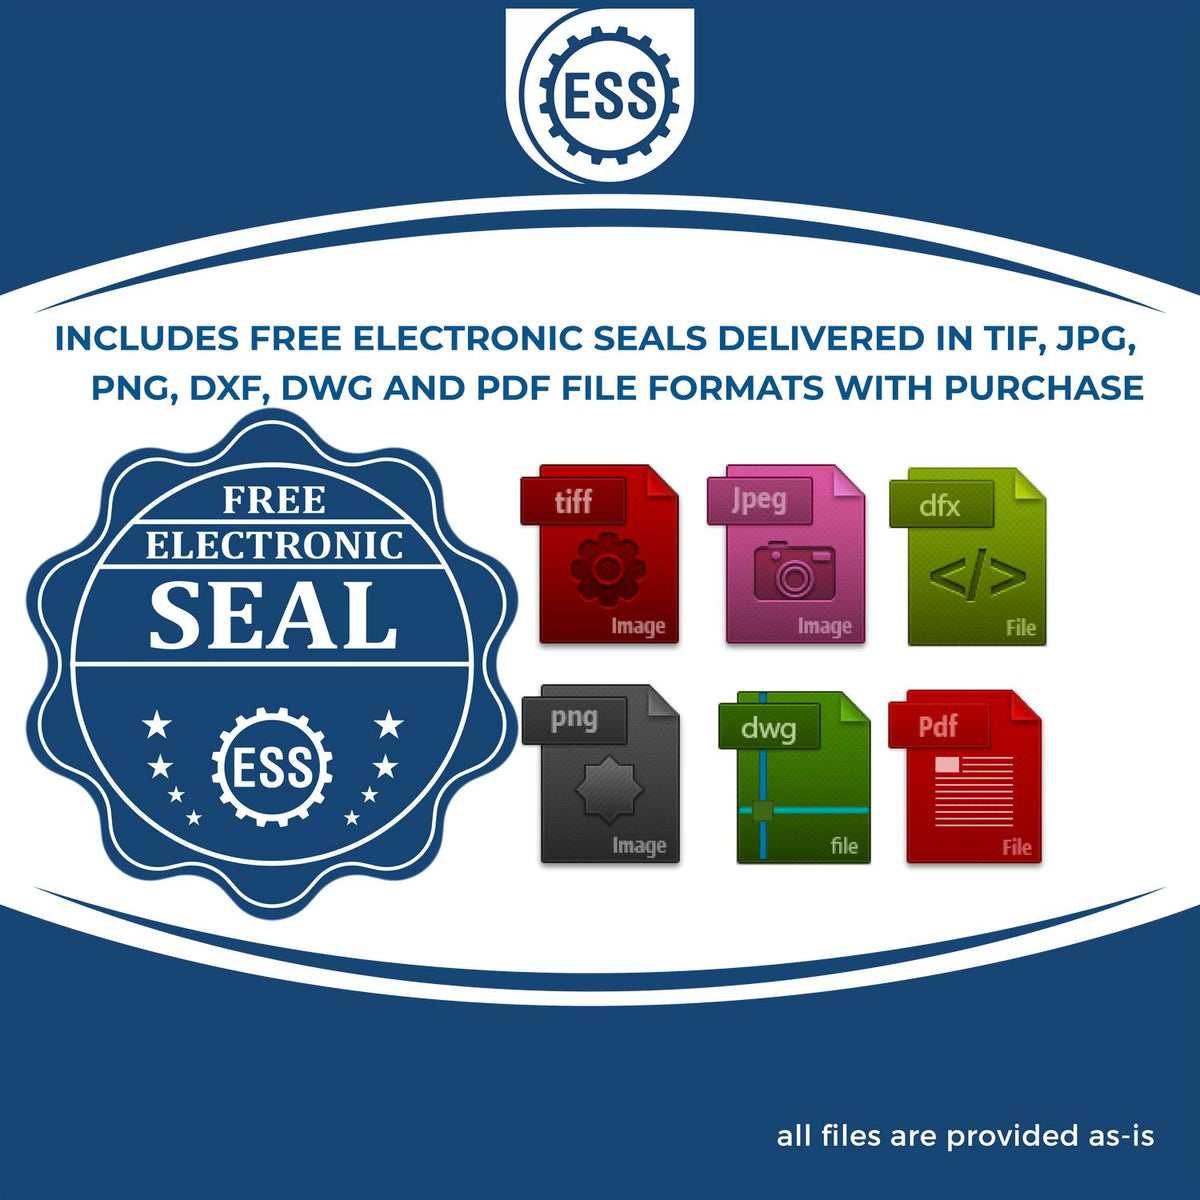 An infographic for the free electronic seal for the State of District of Columbia Extended Long Reach Engineer Seal illustrating the different file type icons such as DXF, DWG, TIF, JPG and PNG.